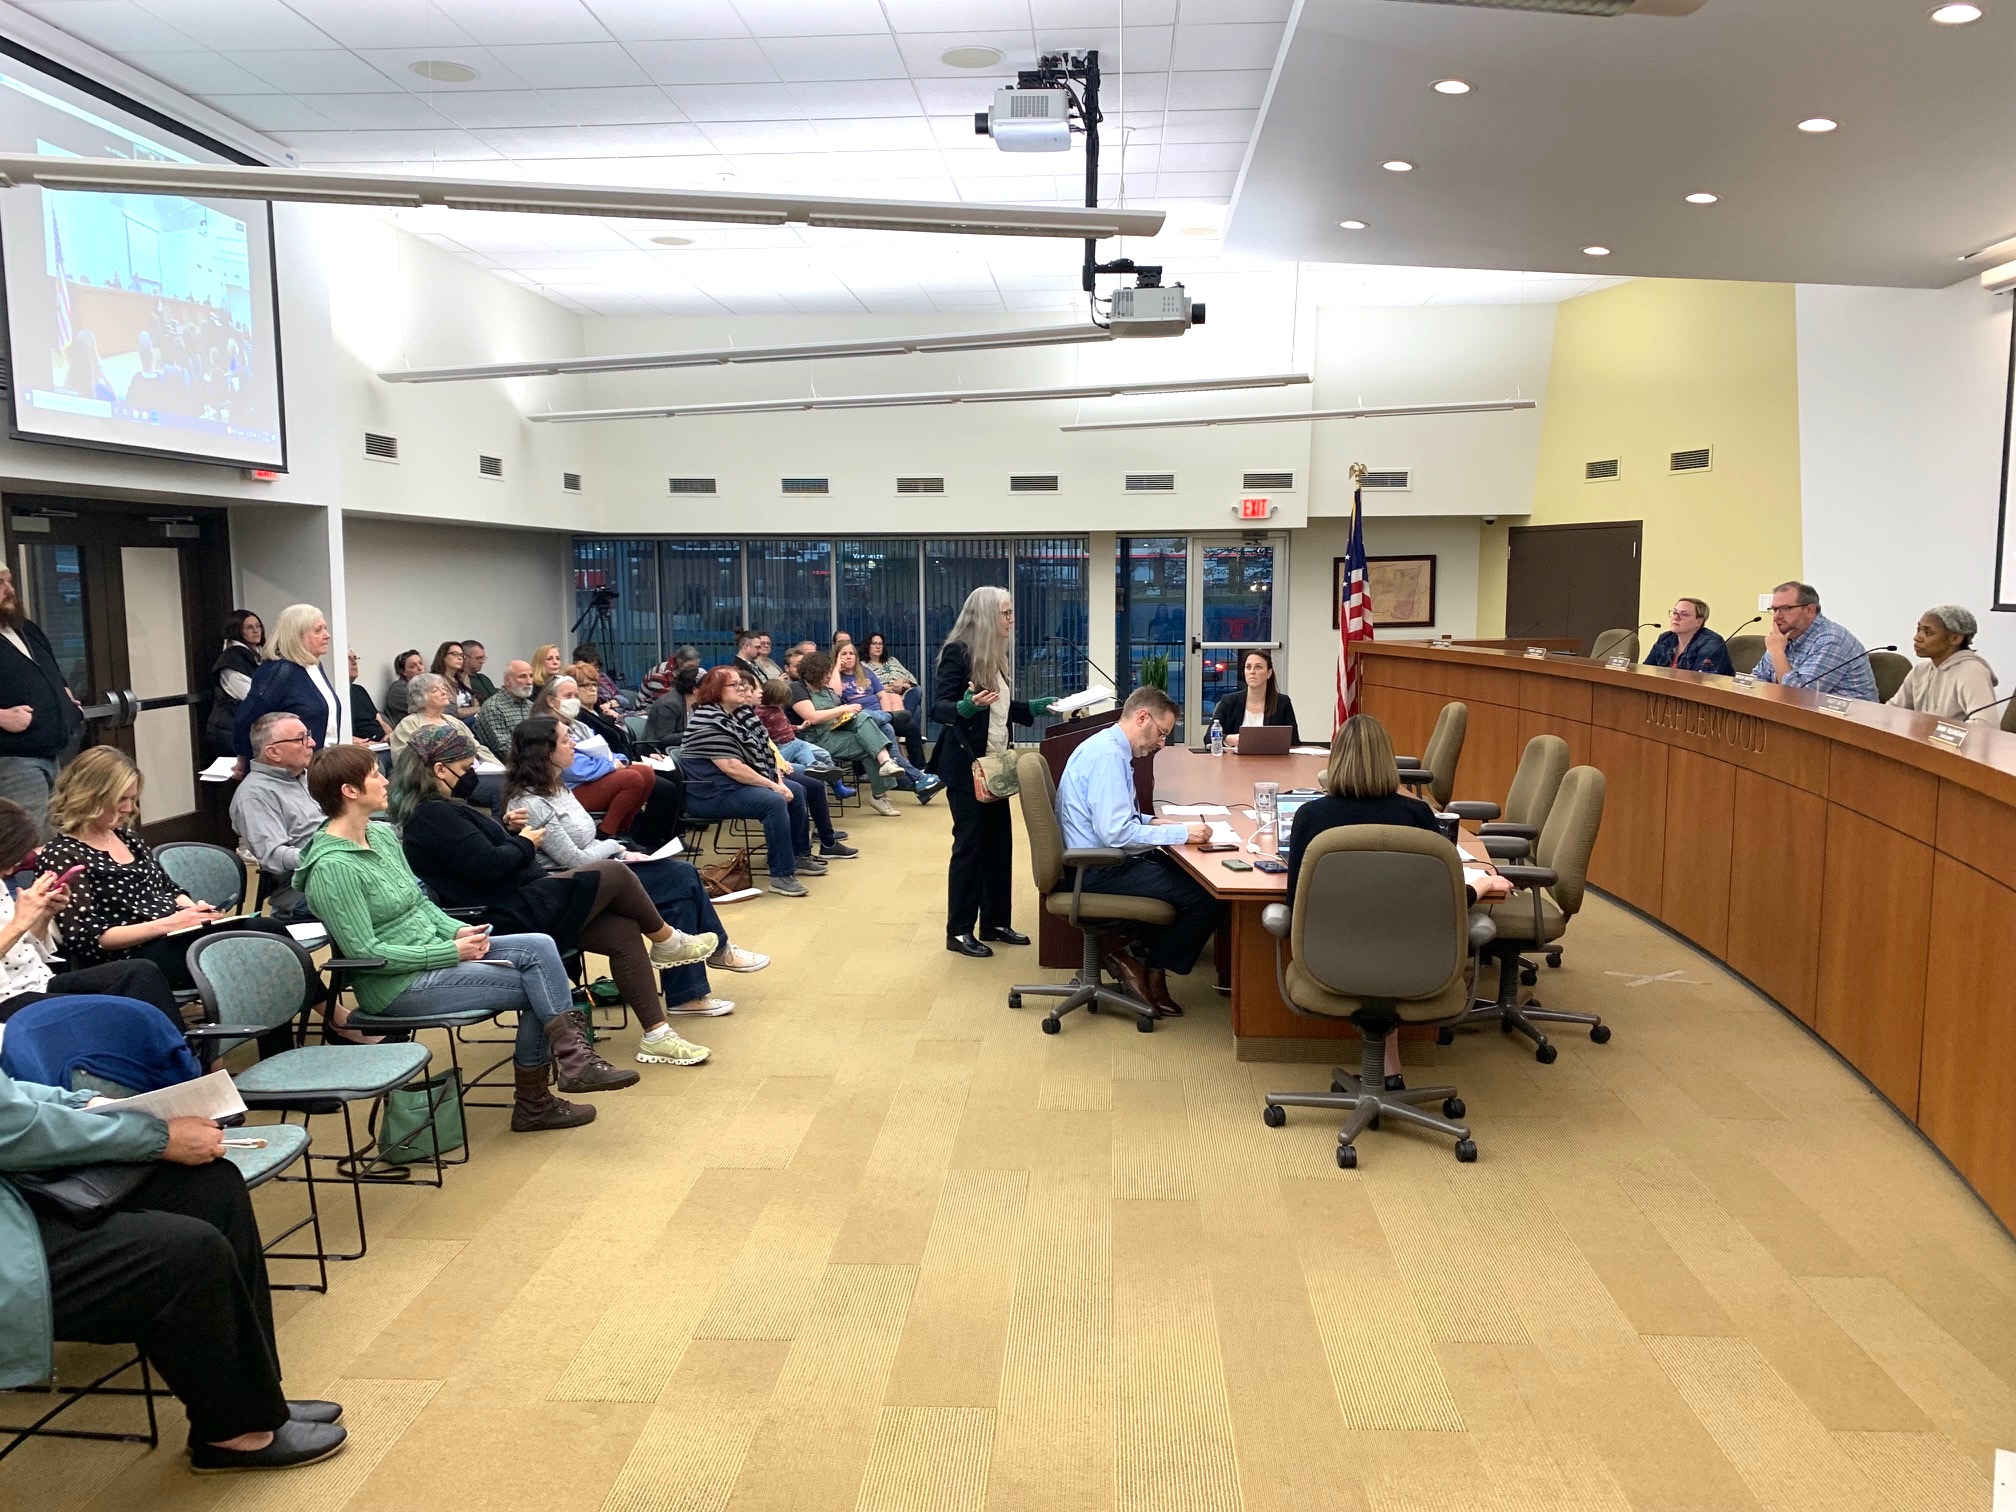 Public comments on housing project and mayoral campaign consume most of Maplewood council meeting